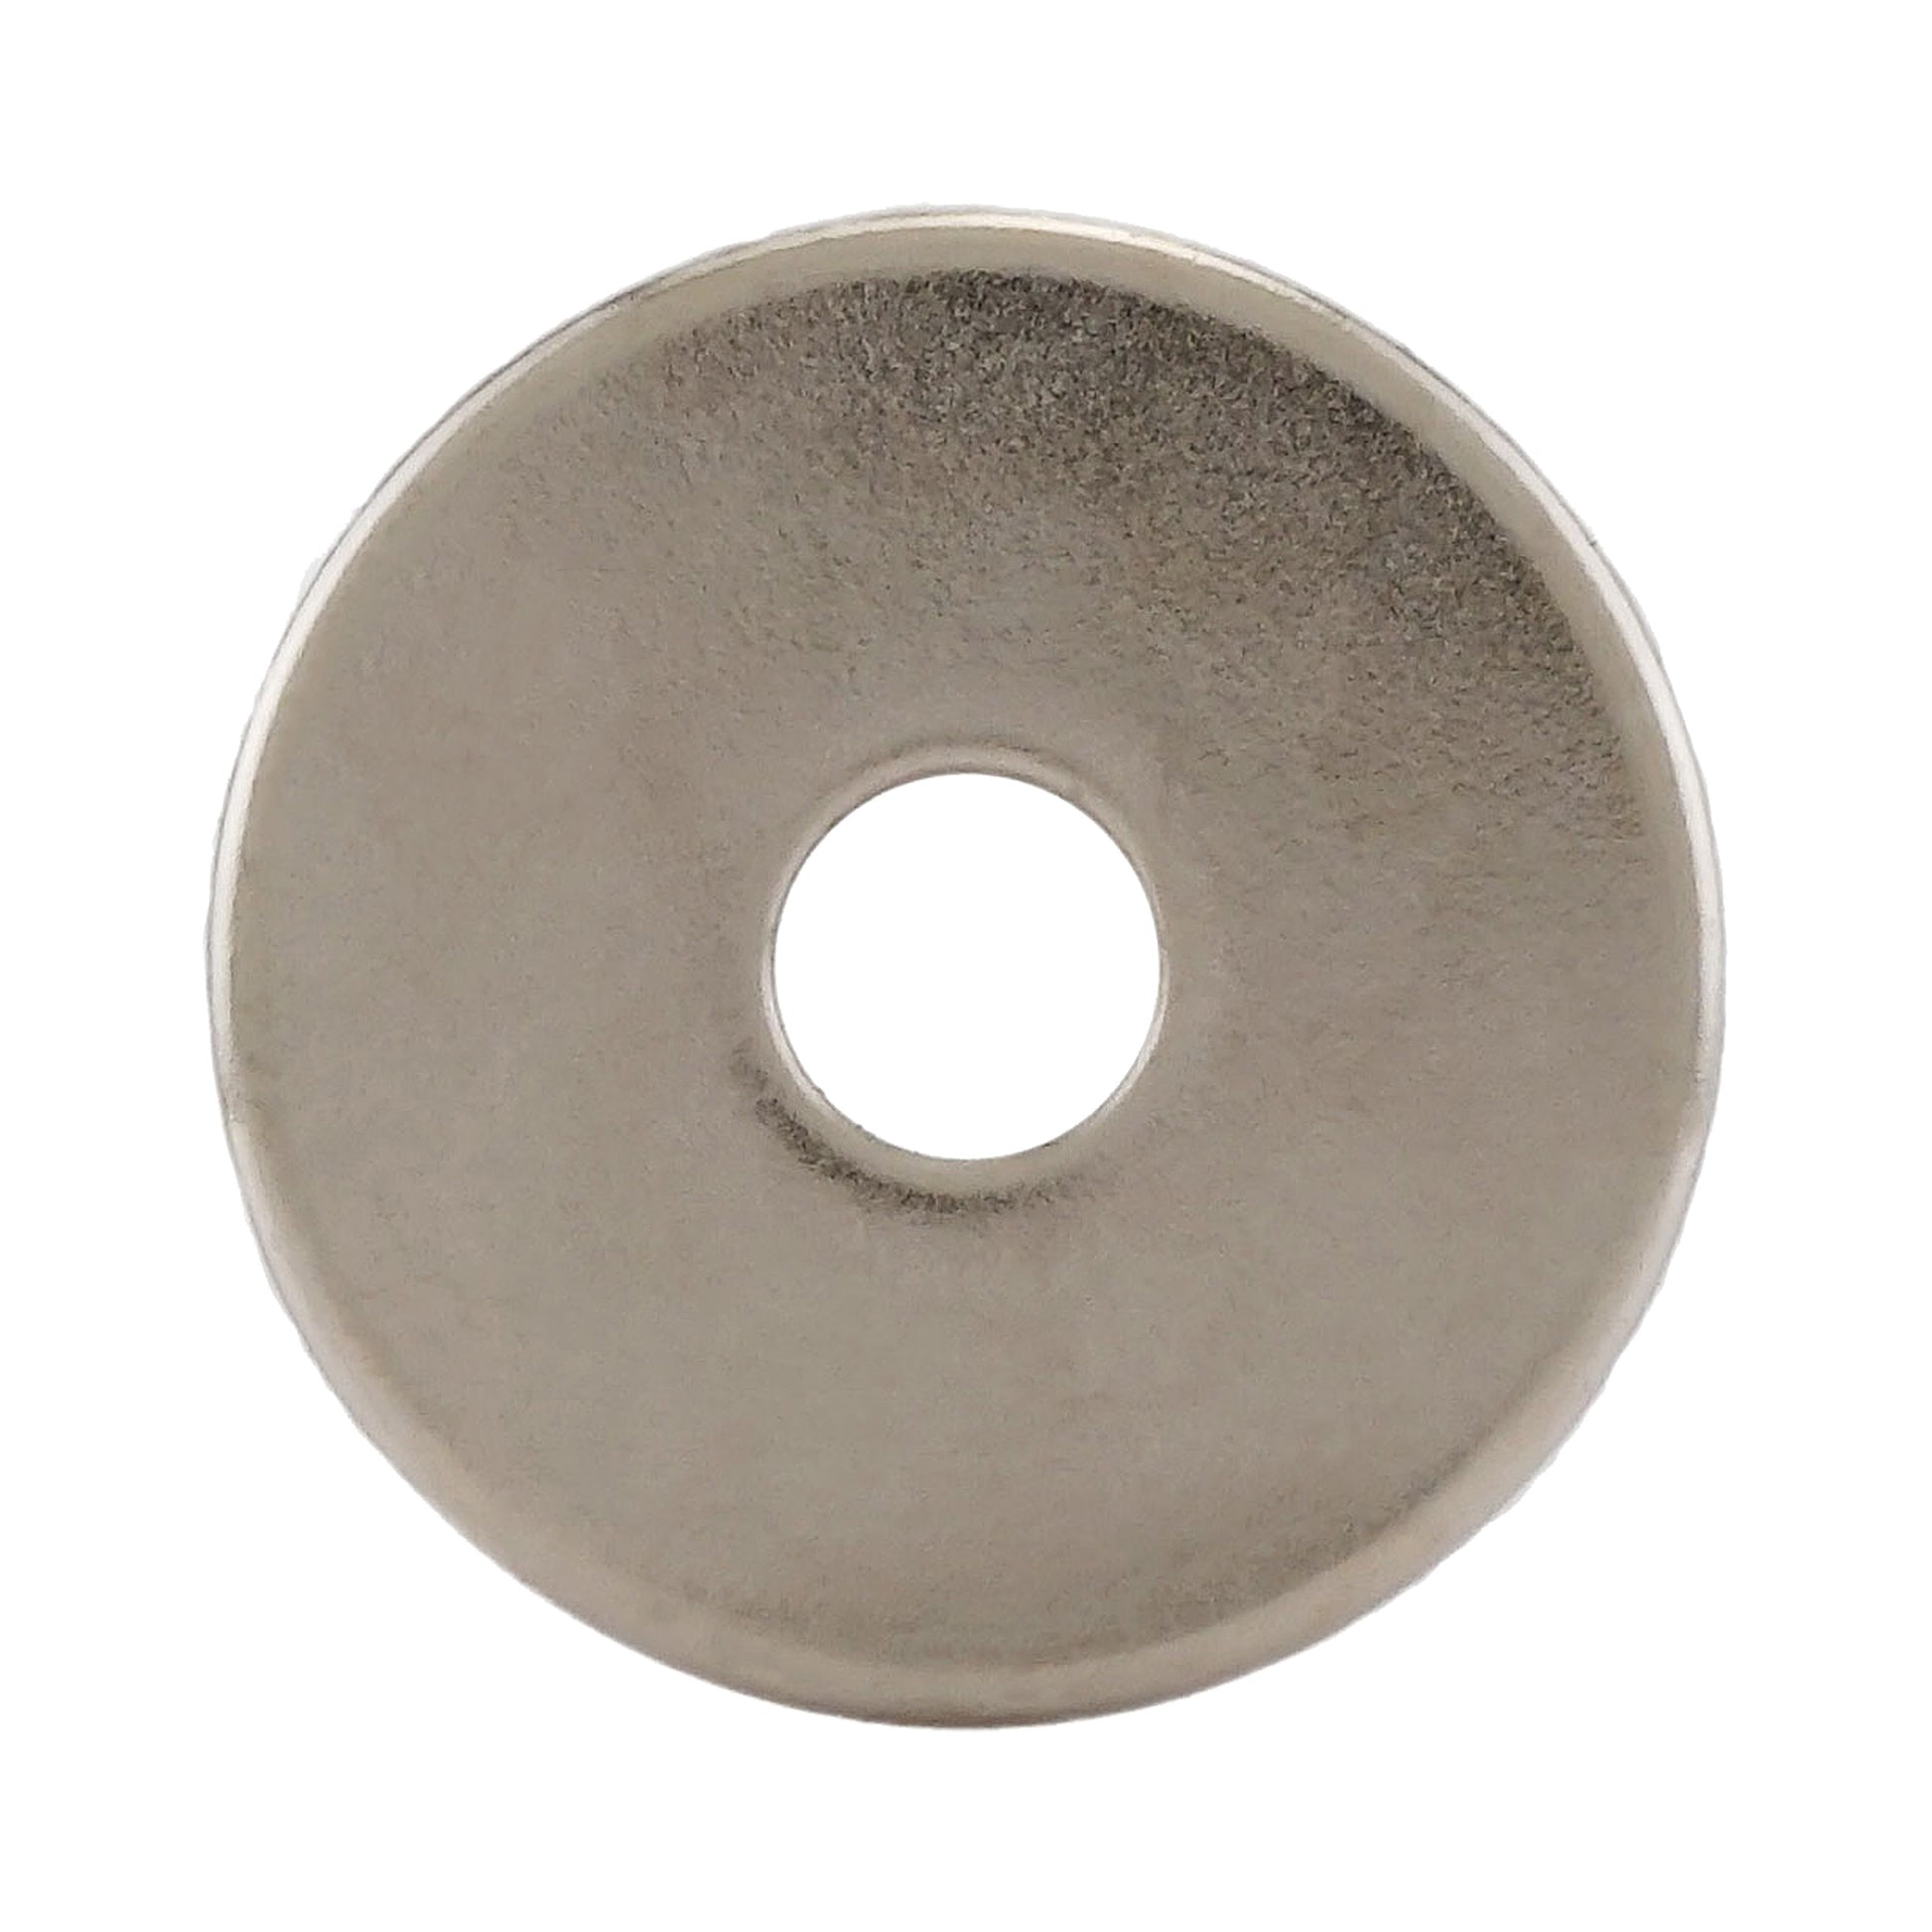 Load image into Gallery viewer, NR010024N Neodymium Ring Magnet - Top View